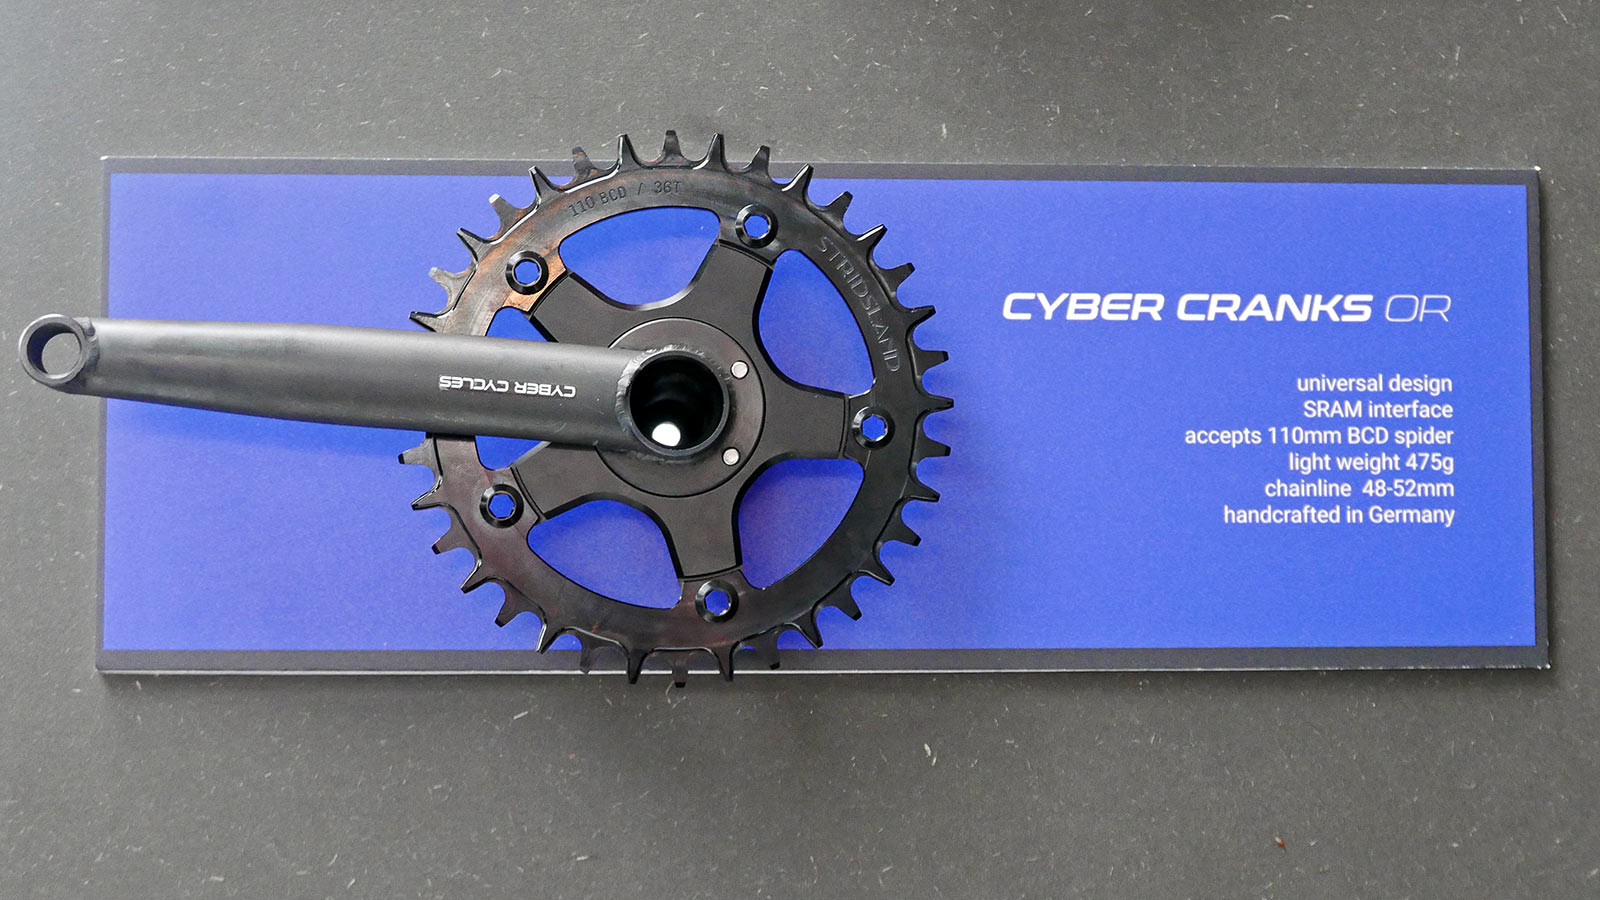 Cyber Cycles Cranks modern modular tubular steel bicycle cranksets, Cyber Cranks OR off-road